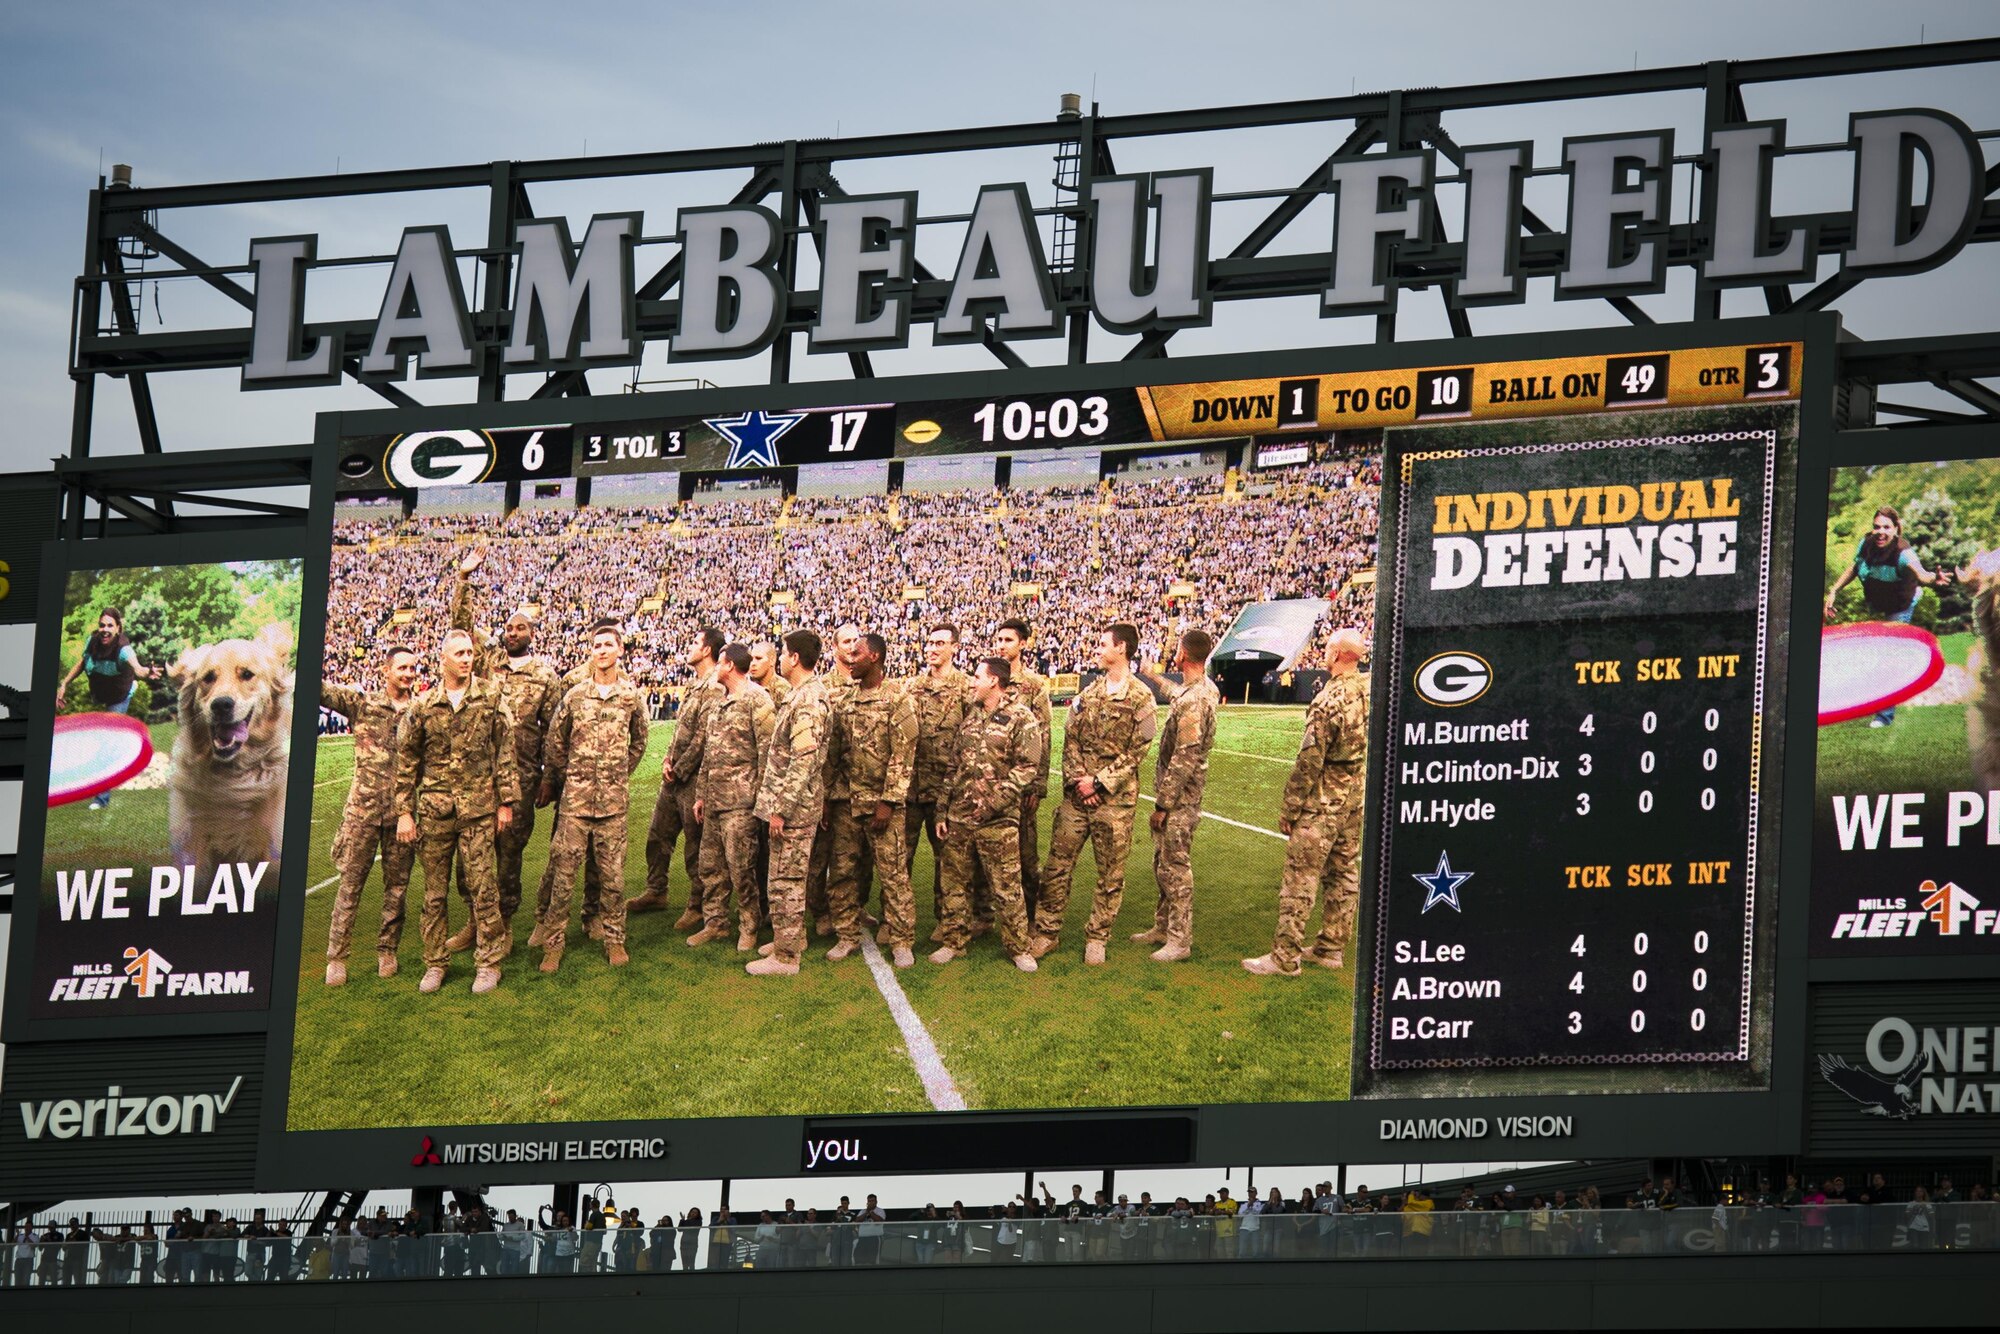 Aircrew with the 8th Special Operations Squadron from Hurlburt Field, Fla., are introduced following the CV-22 Osprey flyover above Lambeau Field, Wis., Oct. 16, 2016. The flyover marks the first time that the 8th SOS has conducted a flyover of an NFL game. The Osprey is a tiltrotor aircraft that combines the vertical takeoff, hover and vertical landing qualities of a helicopter with the long-range, fuel efficiency and speed characteristics of a turboprop aircraft. (U.S. Air Force photo by Airman 1st Class Joseph Pick)